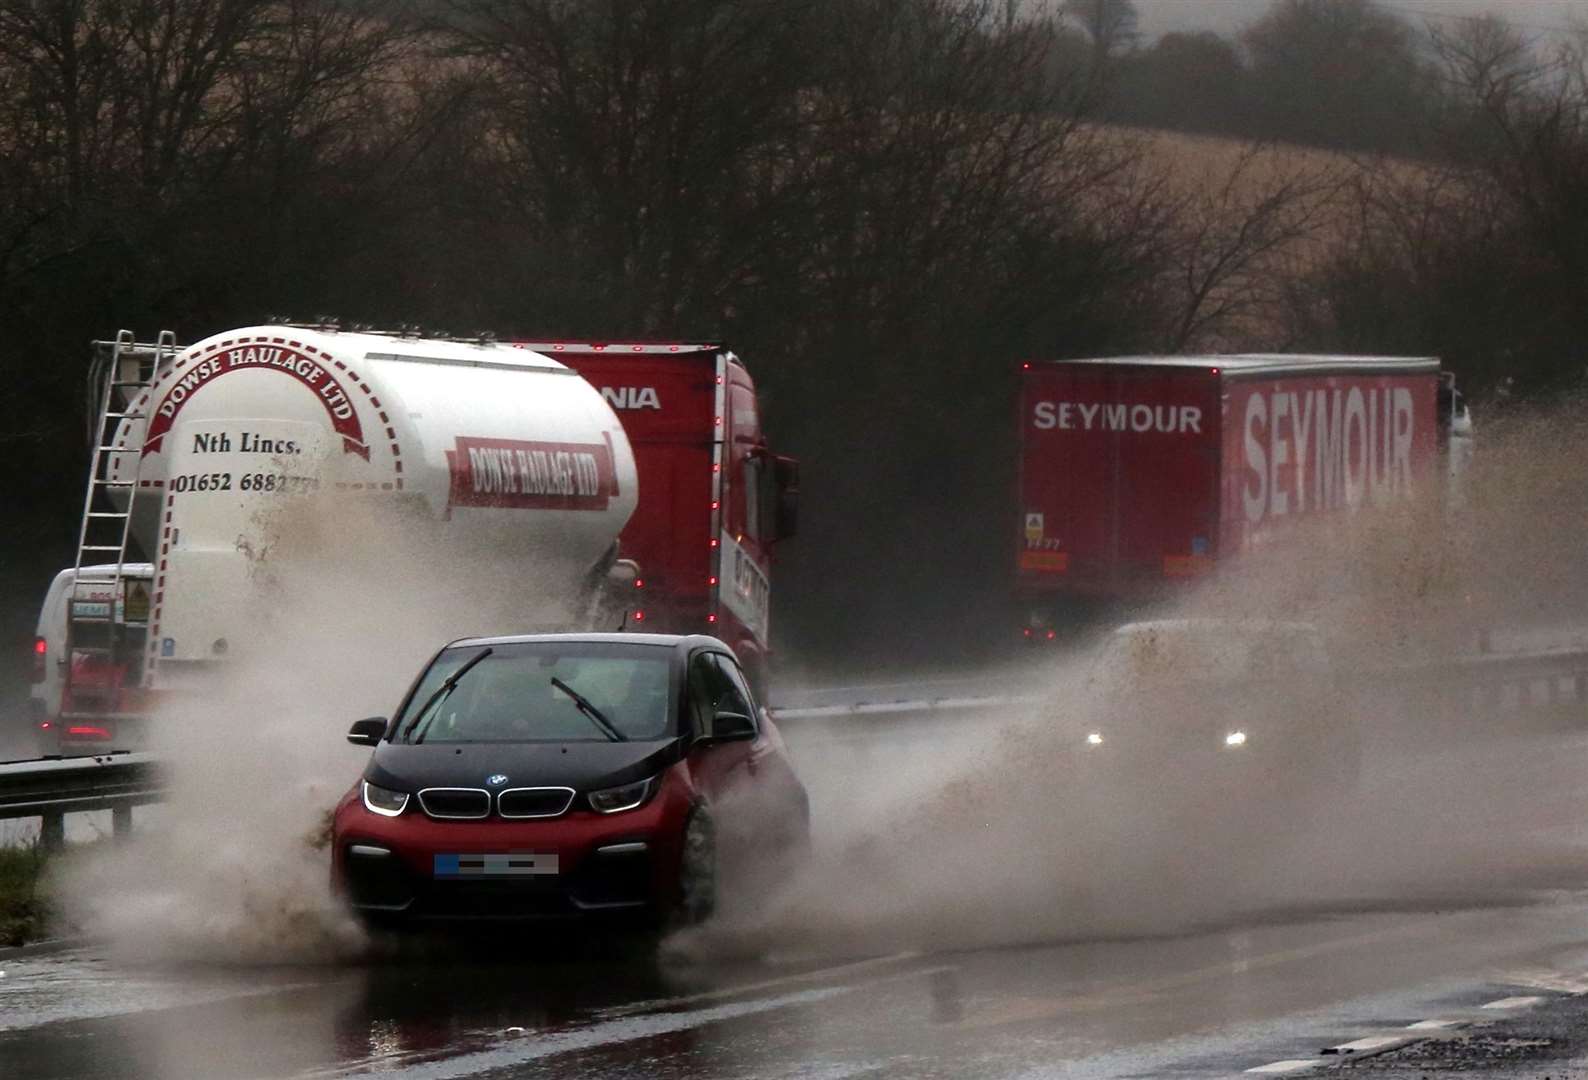 Vehicles were seen aquaplaning. Picture: UK News in Pictures